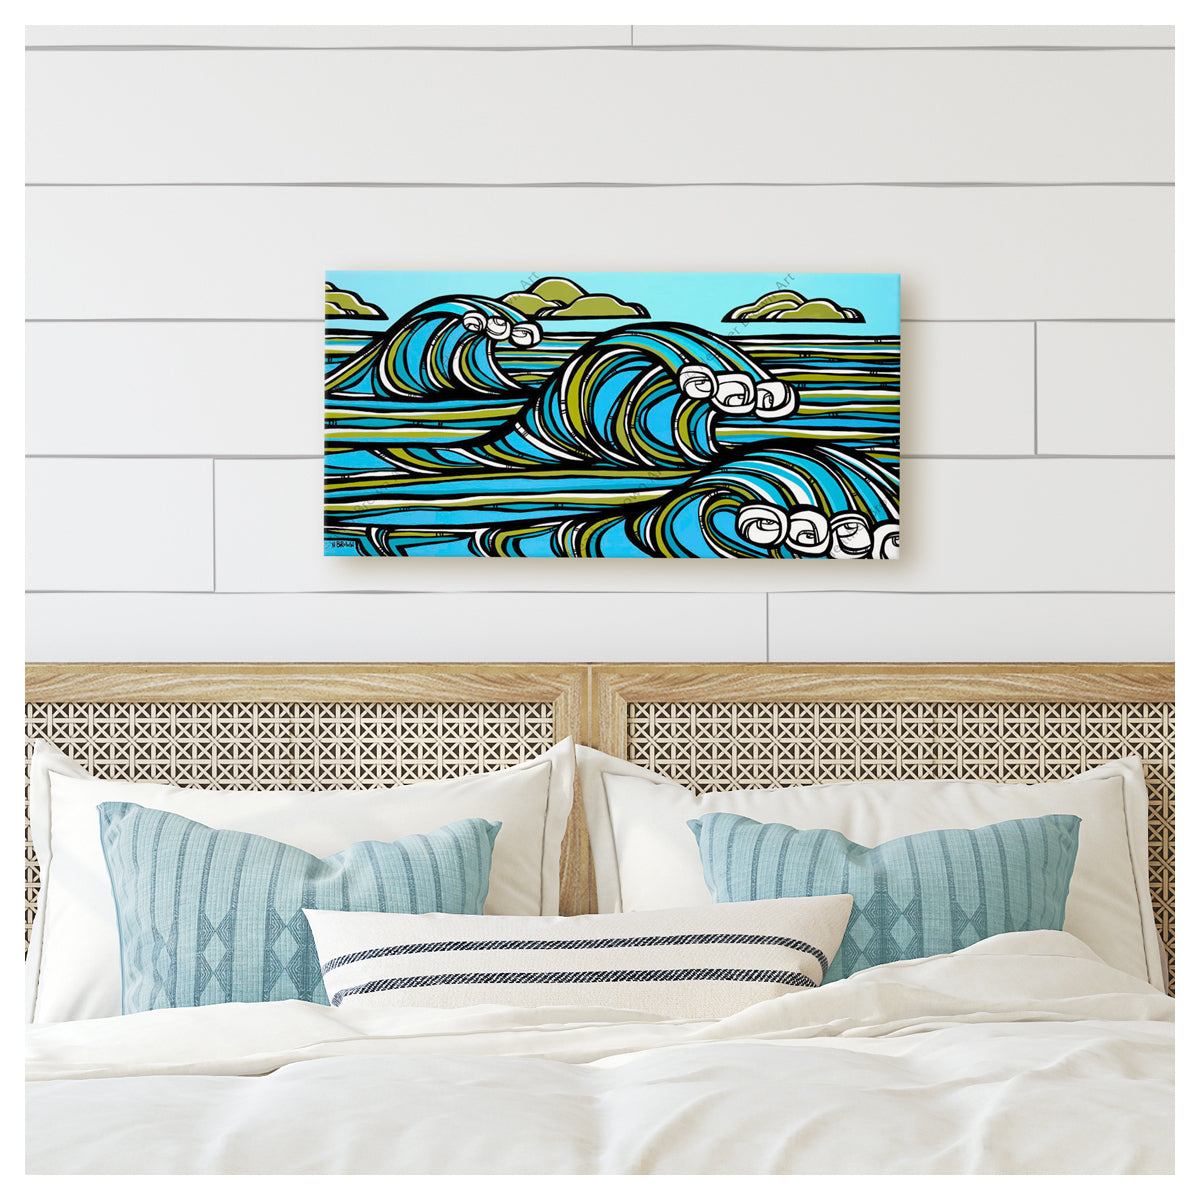 North Swell Canvas Giclée Print by Hawaii surf artist Heather Brown 